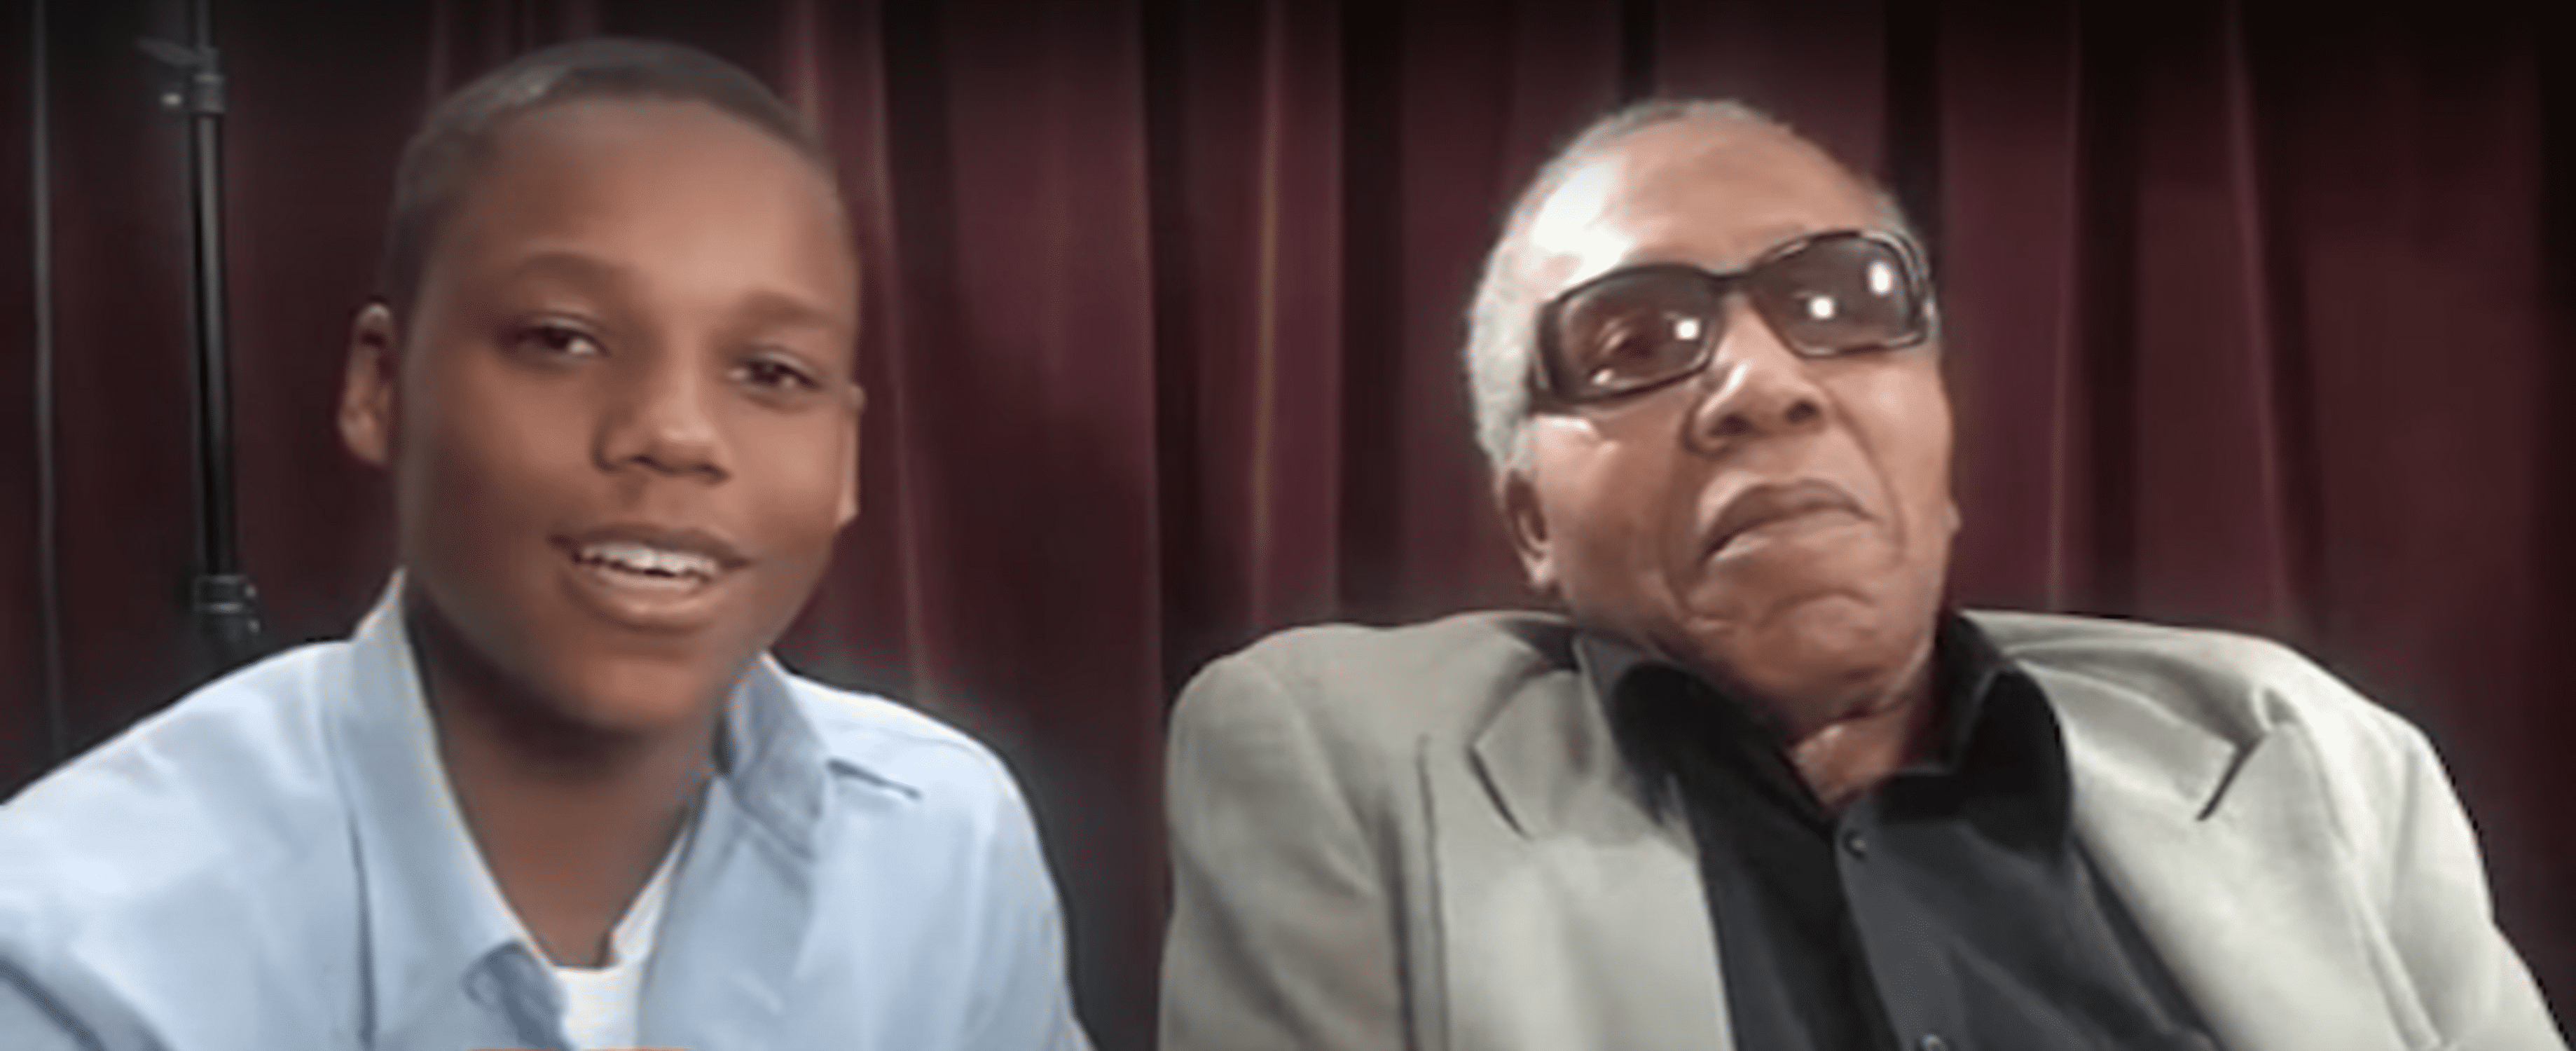 Ray Lucas and Frank Lucas circa 2010. | Source: Youtube/Vladtv